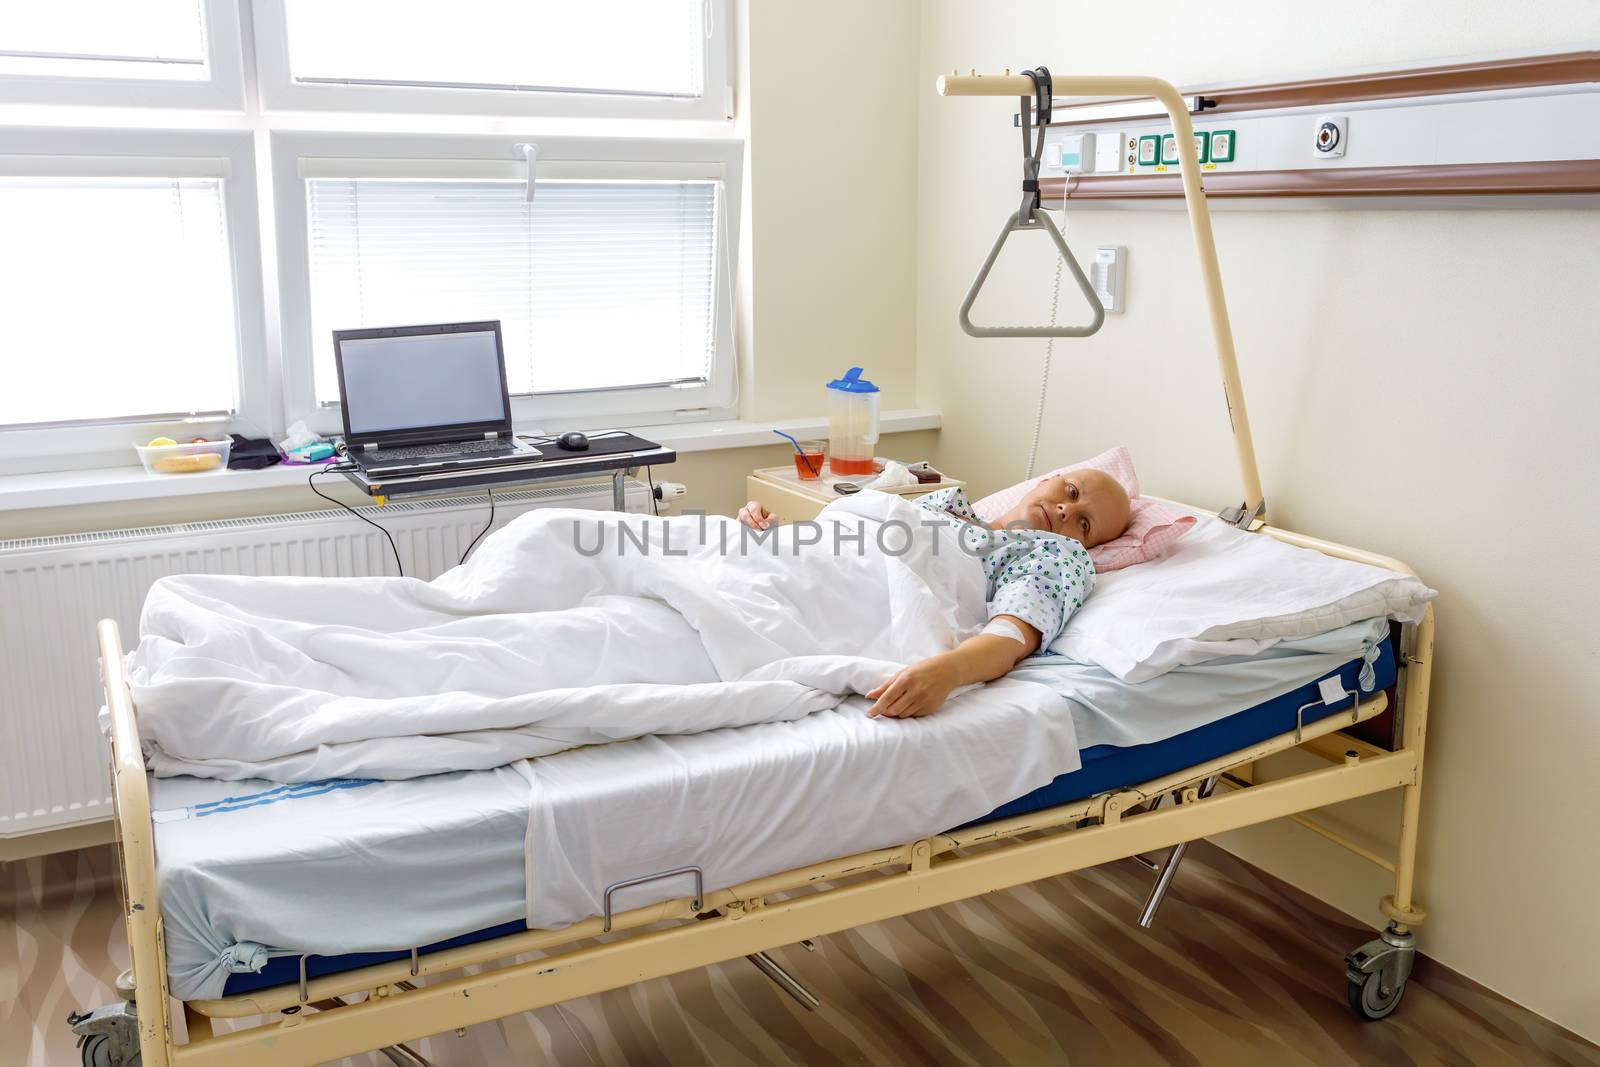 Middle age woman without hair after chemotherapy patient lying at hospital bed feeling sad and depressed worried. Disease feeling sick in health care and clinical attention concept.